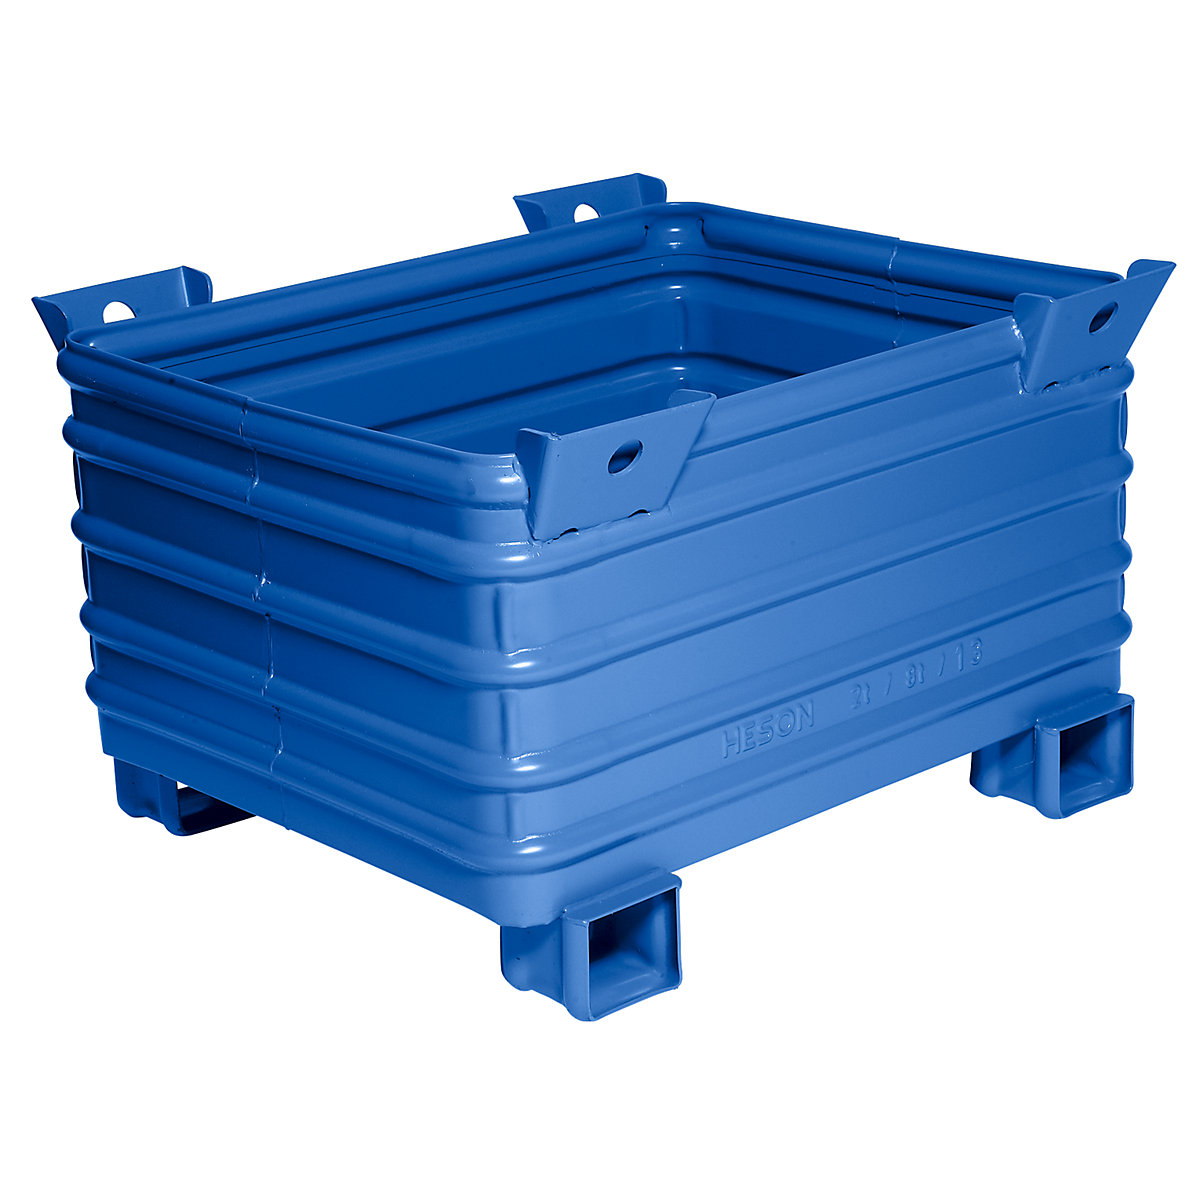 Heavy duty box pallet – Heson, WxL 800 x 1000 mm, with U-shaped feet, painted blue, 10+ items-5